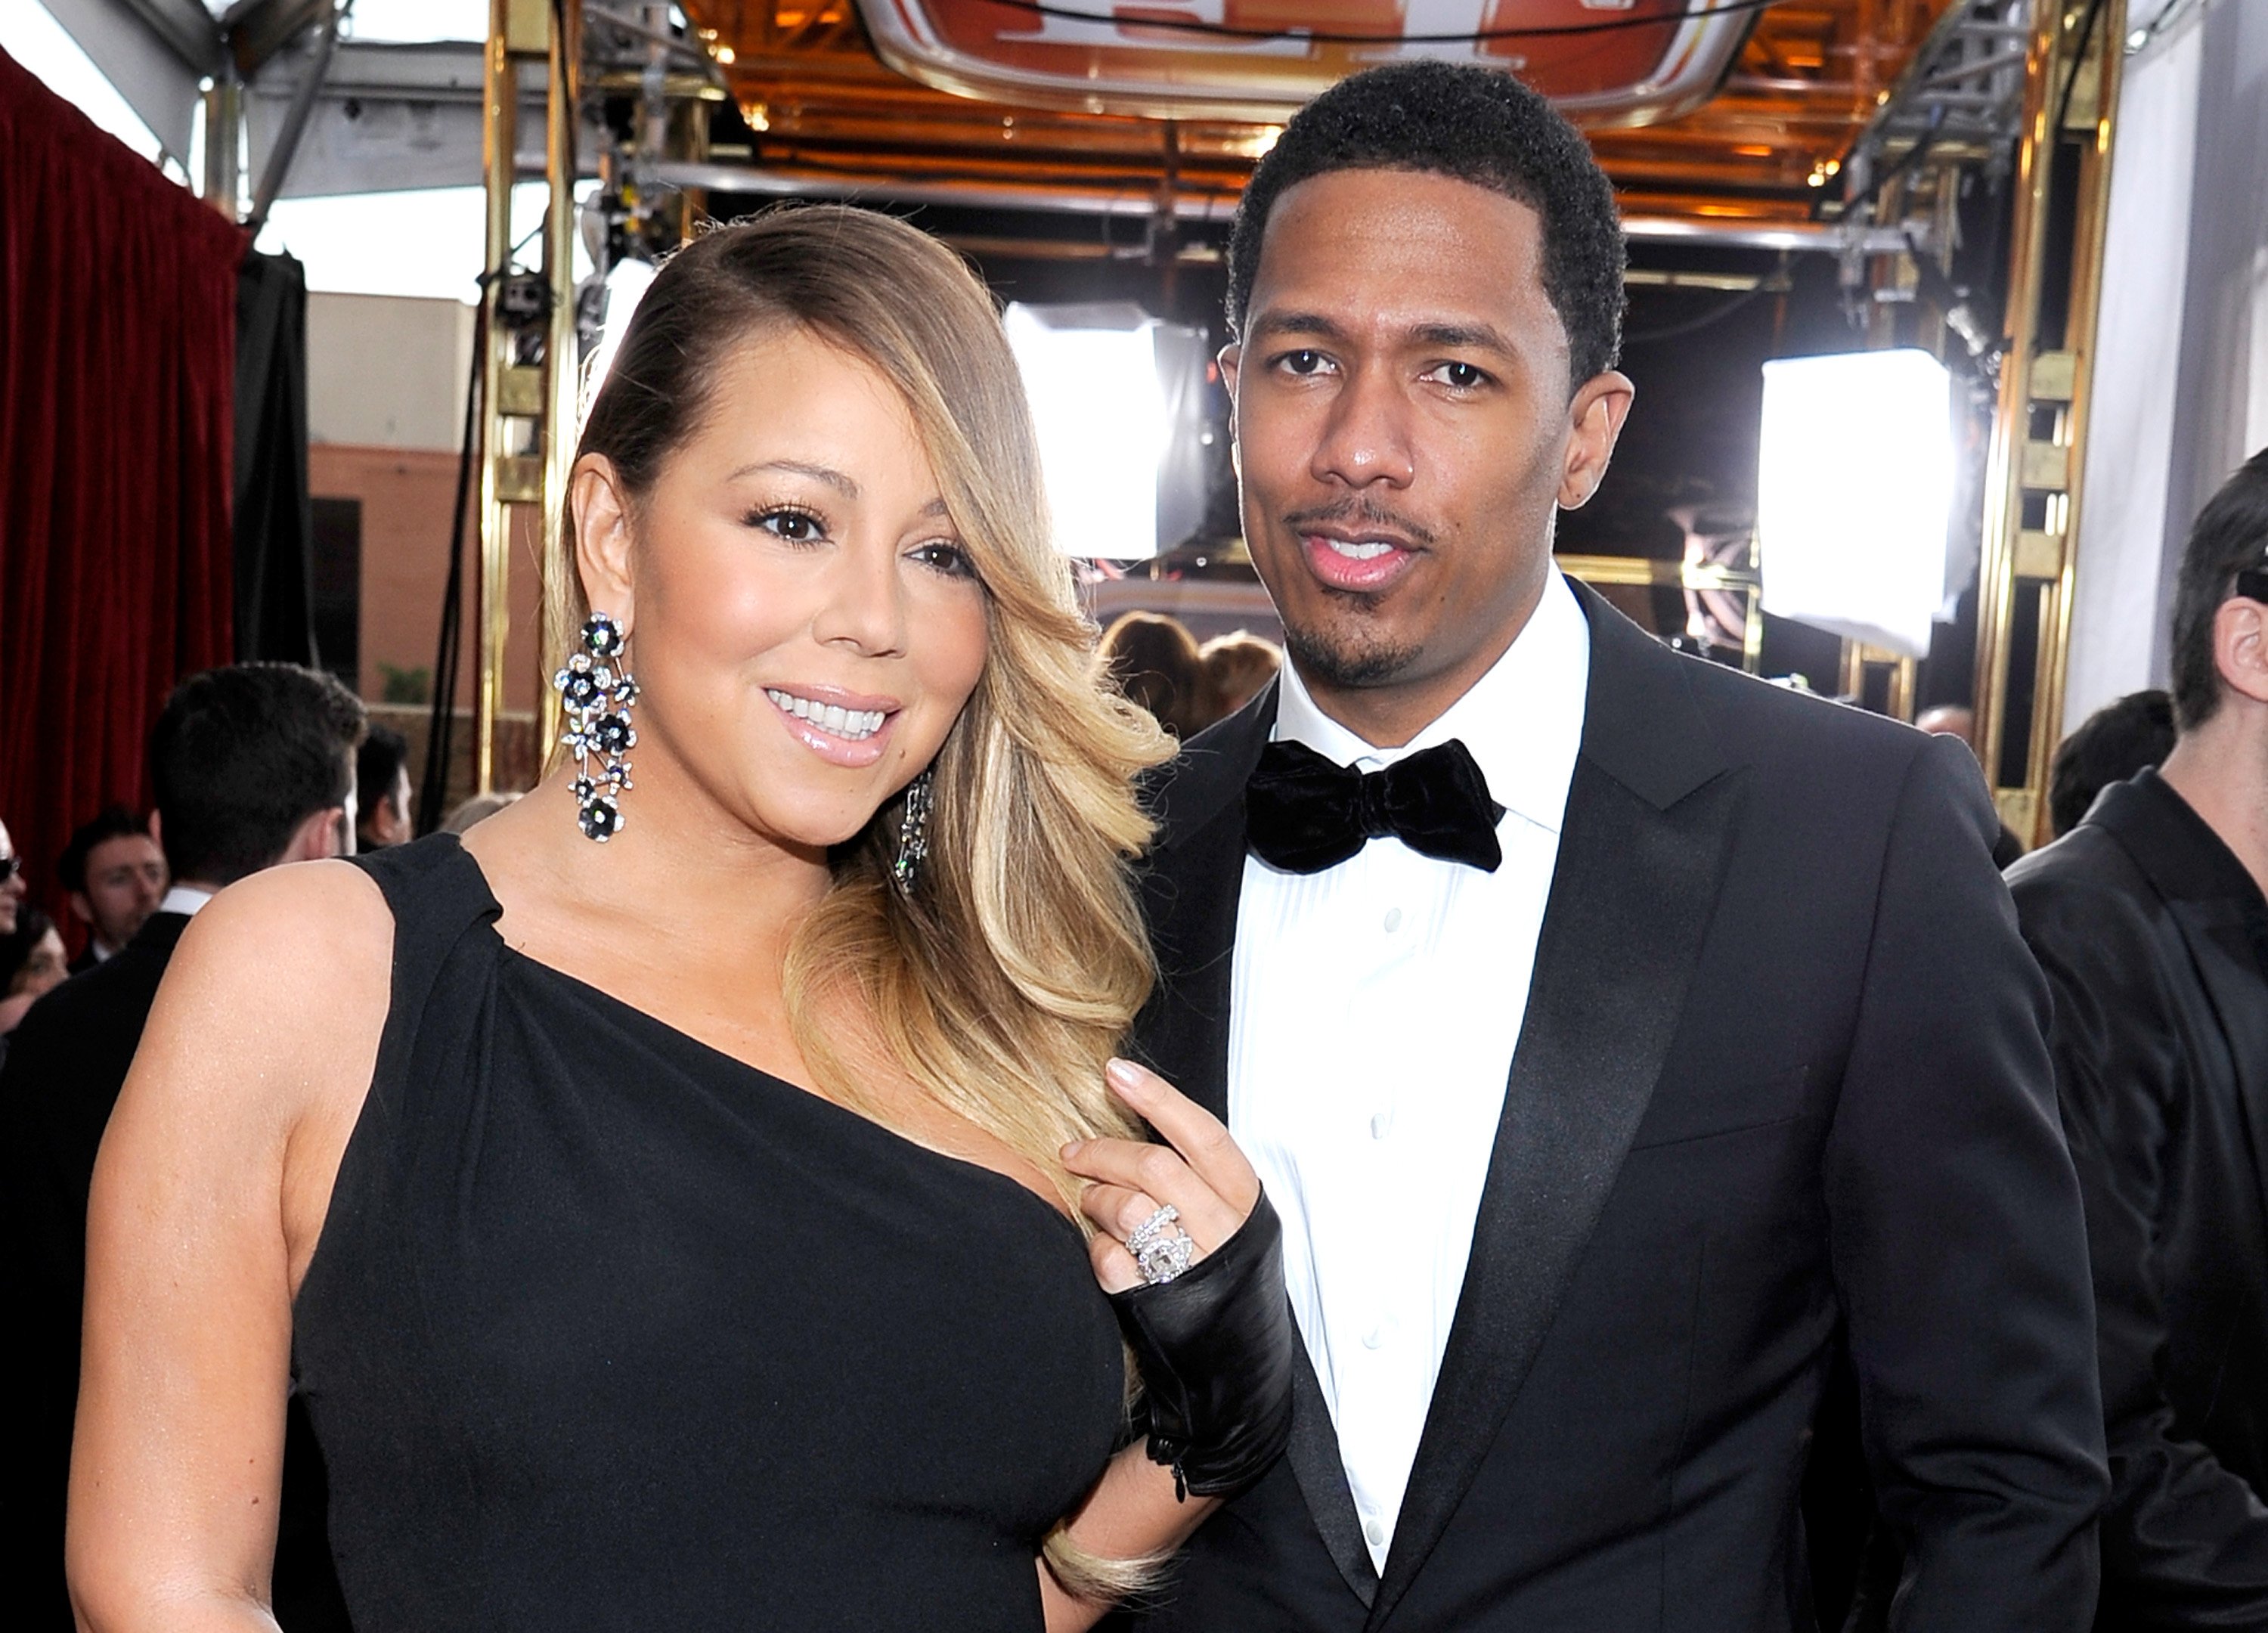 Mariah Carey and TV personality Nick Cannon attend the 20th Annual Screen Actors Guild Awards at The Shrine Auditorium on January 18, 2014 in Los Angeles, California | Photo: Getty Images